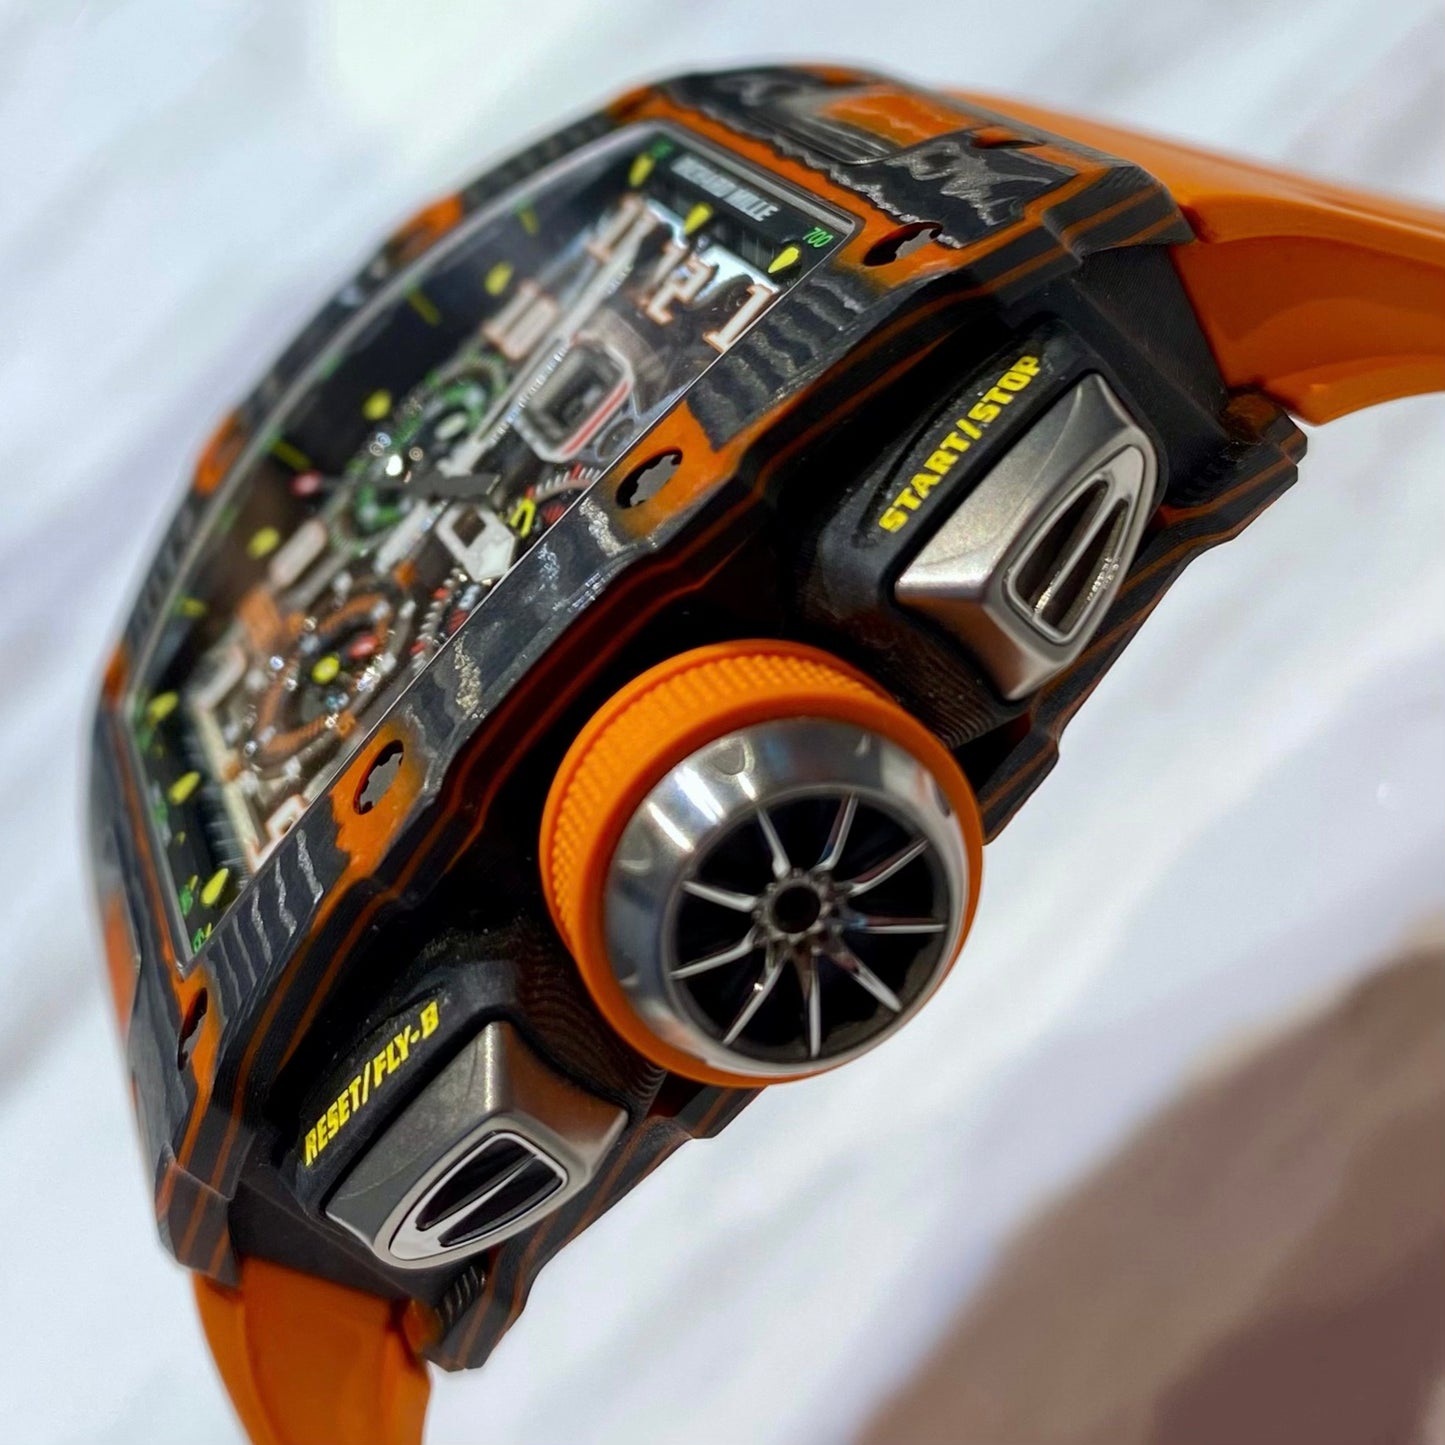 RM11-03 McLaren Limited Edition  Richard Mille - 株式会社アート